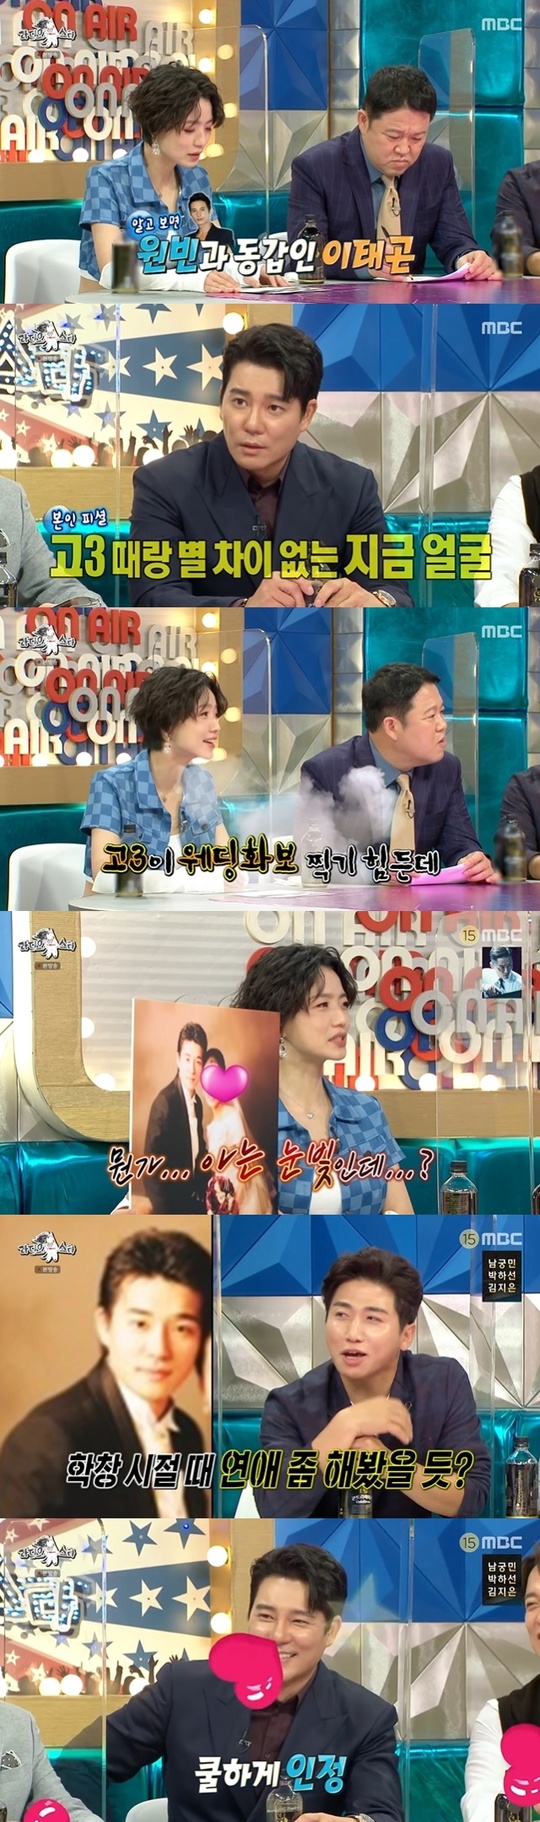 1977 years born 45 years old Lee Tae-gon revealed that he took a wedding picture at the age of 3 because of presbyopia, and admitted his love with his college student sister at the time.In the 740th MBC entertainment program Radio Star broadcast on October 6, Actor Lee Tae-gon, Choi Dae-chul, Sun Capital, and comedian Kim Joon-hyun appeared in the special feature of Bangseok Billions.Lee Tae-gon once had a comparison with Won Bin in his age, but now he is proud. It is similar to the time of high school.I also took a wedding picture (because of presbyopia) in my third year of high school, he said.A wedding photo of Lee Tae-gon, released soon after, said Ahn Young Mi, I think I am the real Lee Tae-gon married person.Who would think it was a high school? Ahn Young Mi pointed out that the eyes are the eyes that know something, and Yoo Se-yoon fanned that I made a college student sister at this time.